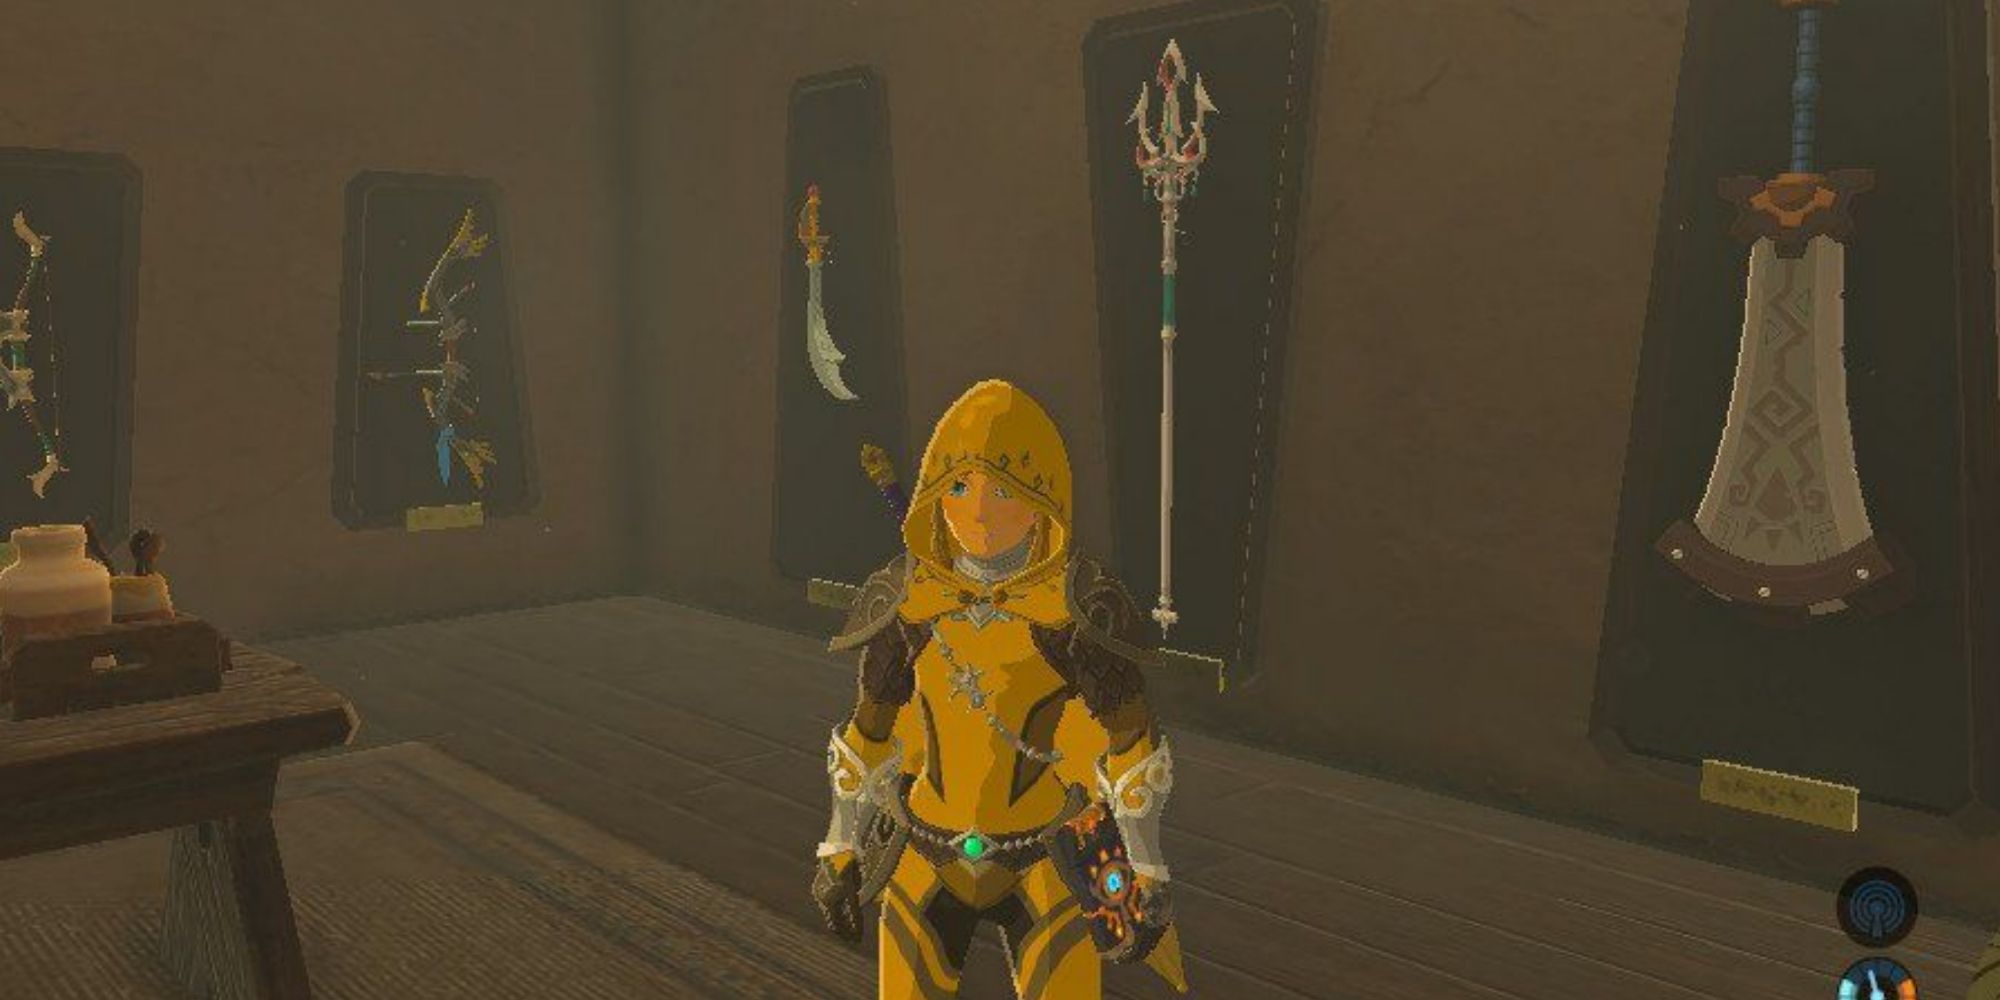 Link's in his house surrounded by displayed weapons.